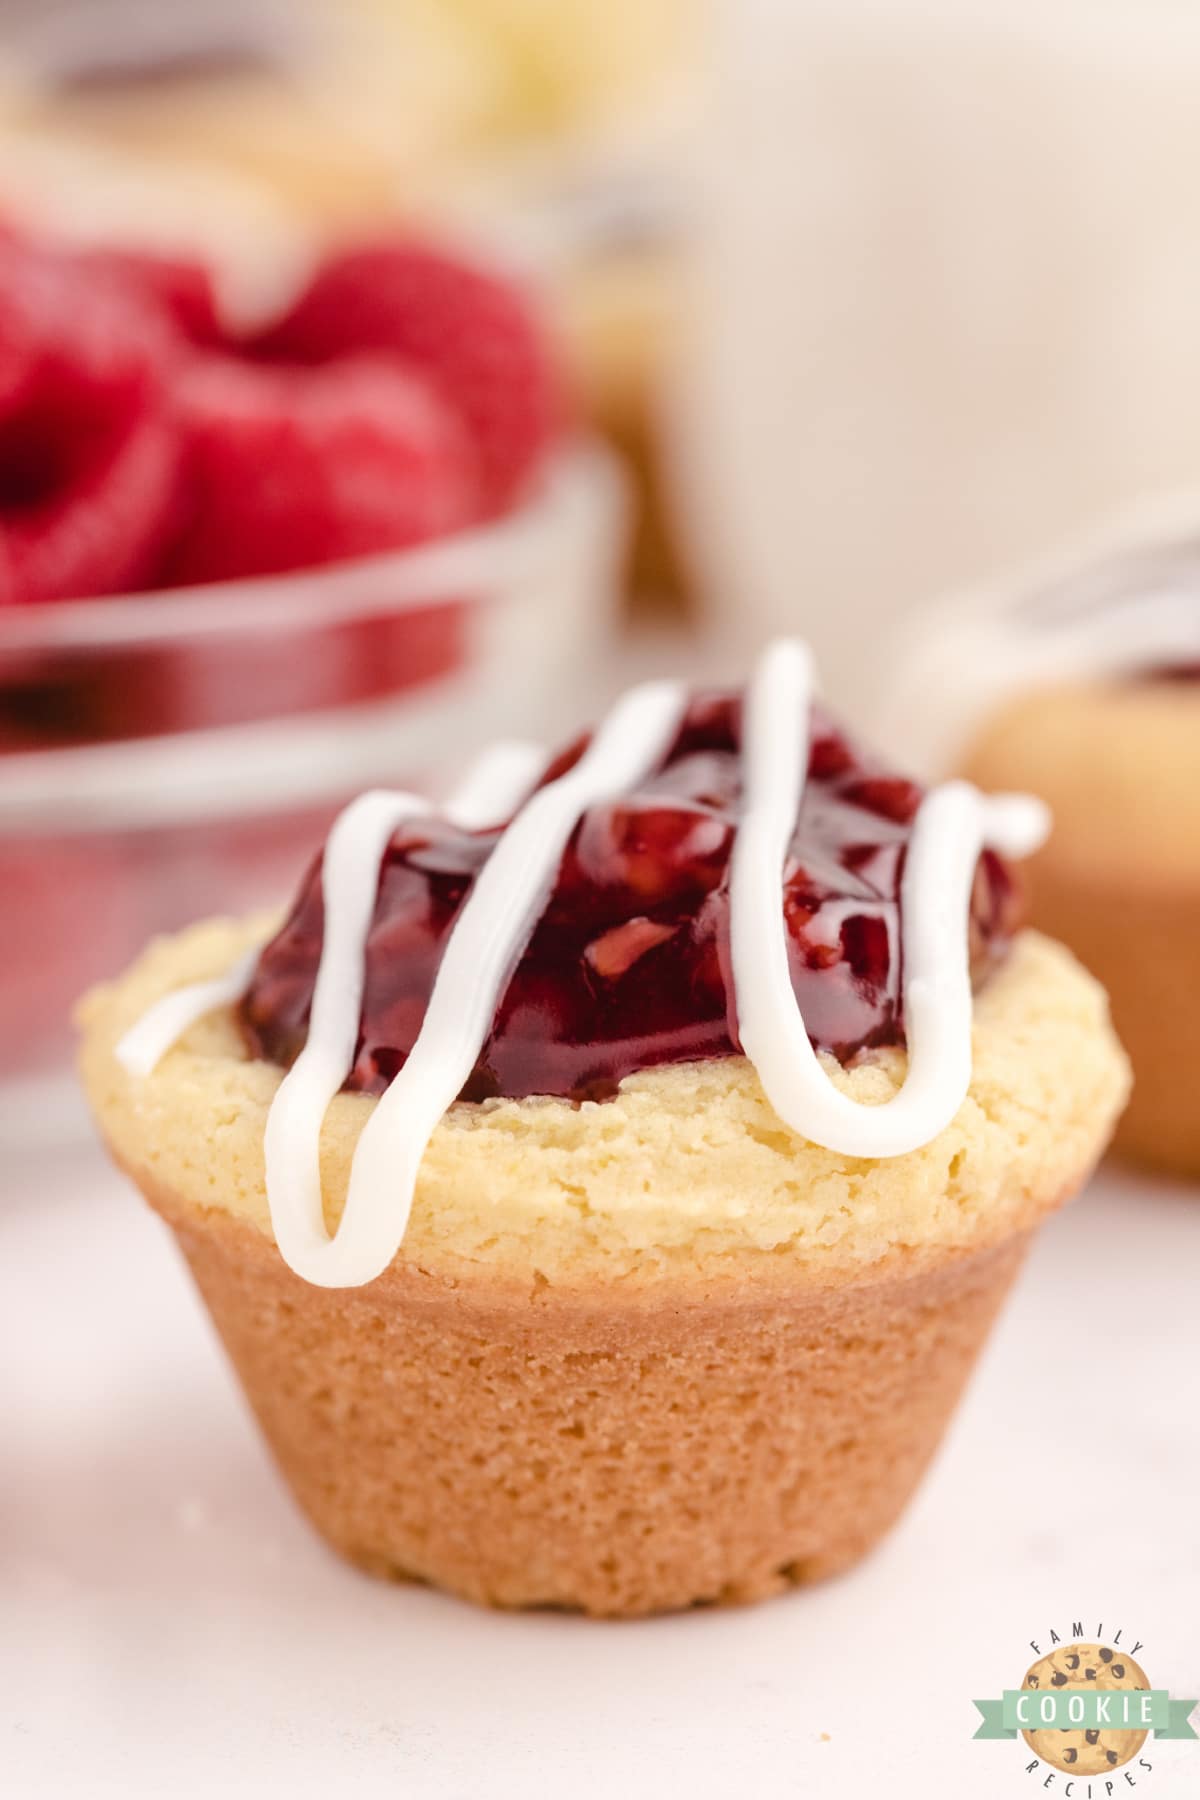 Lemon Raspberry Cookie Cups are made with a simple lemon cookie recipe and raspberry pie filling. Drizzle a little white chocolate on top for a bite sized cookie cup recipe that is impressive and delicious!